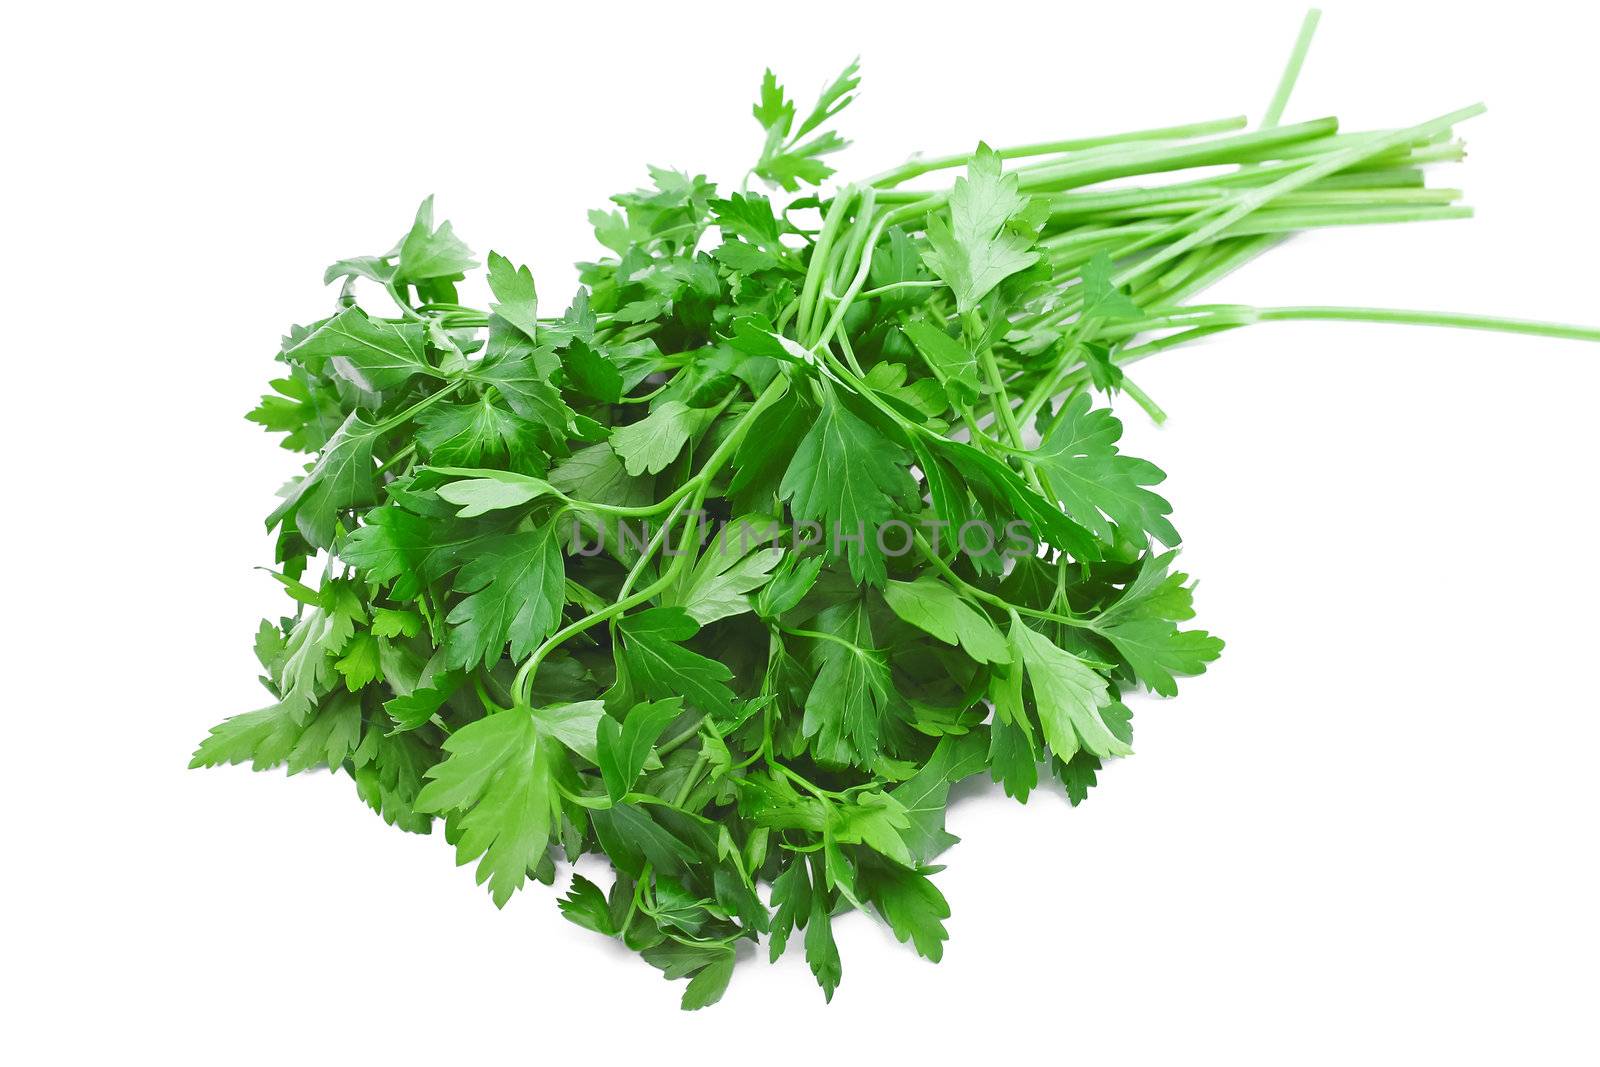 Bunch of parsley on a white background by NickNick